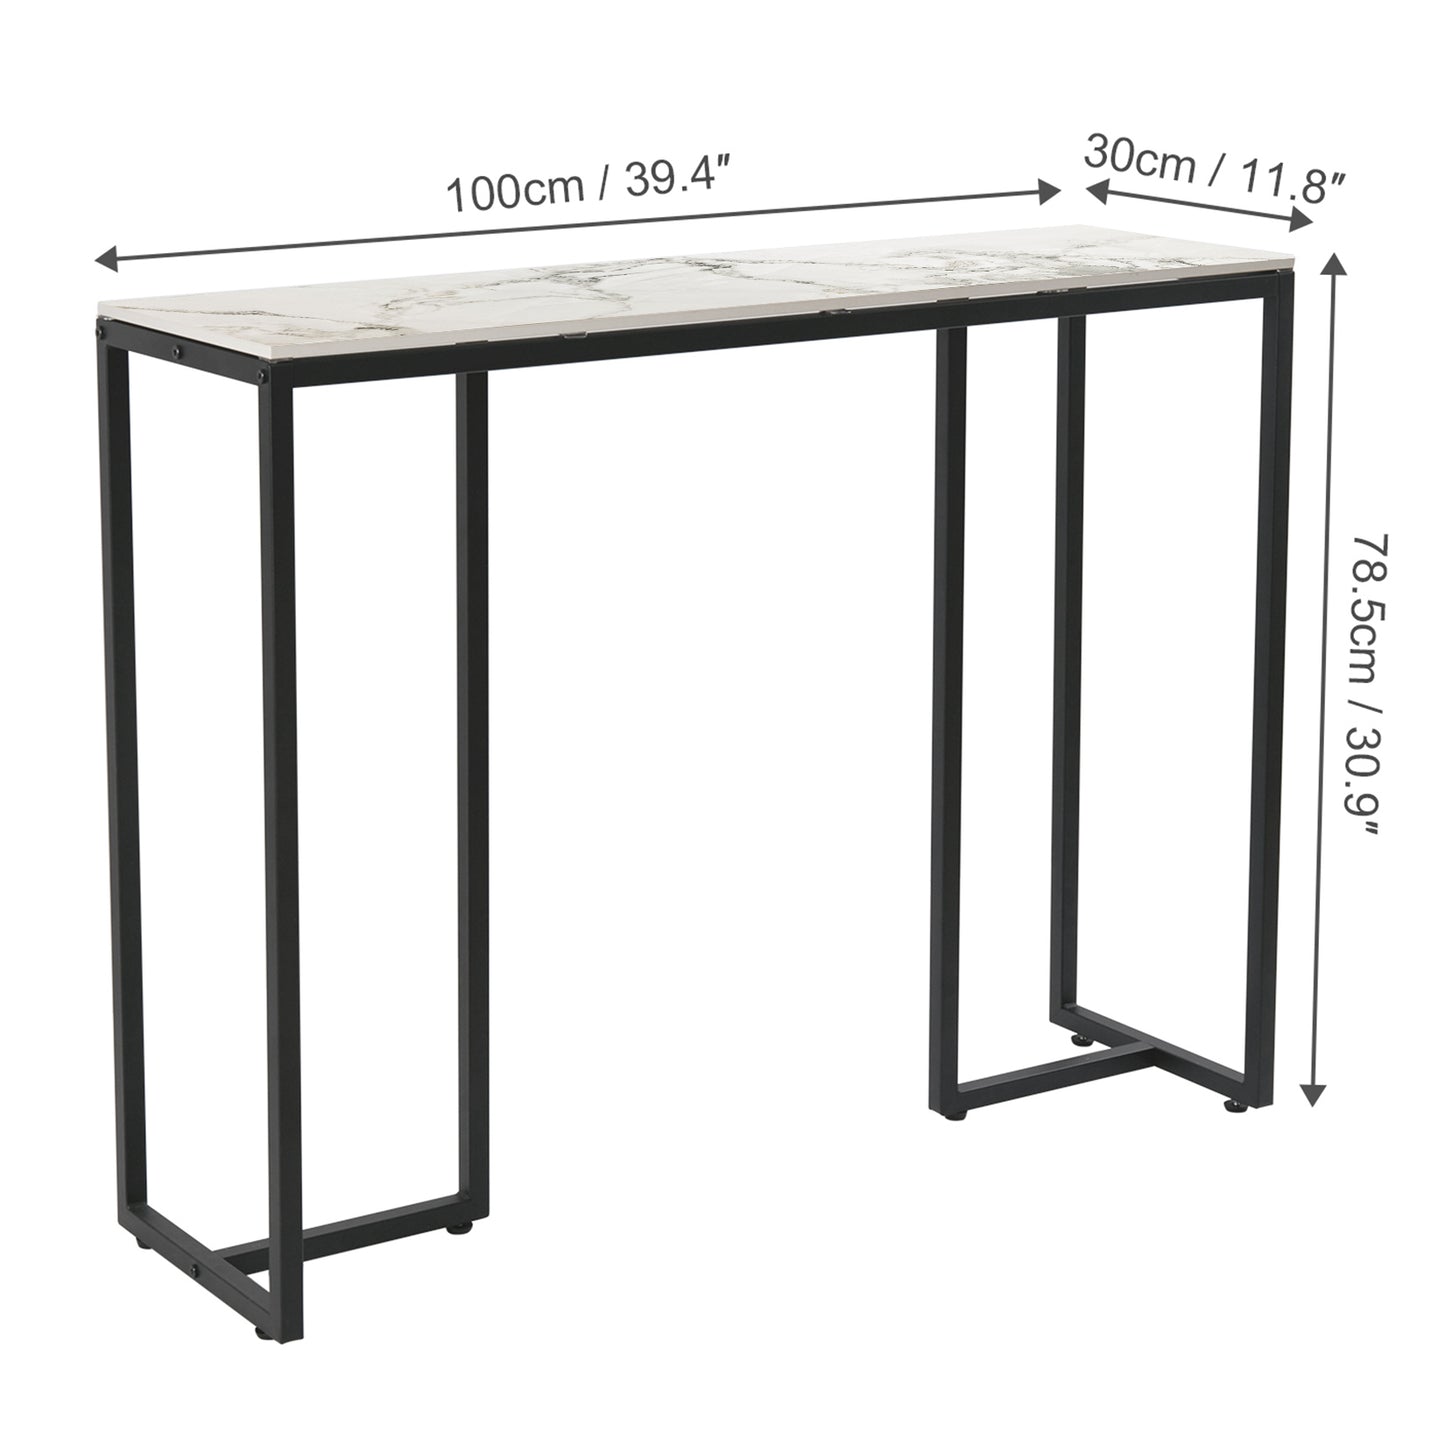 Console Table for Foyer Entryway